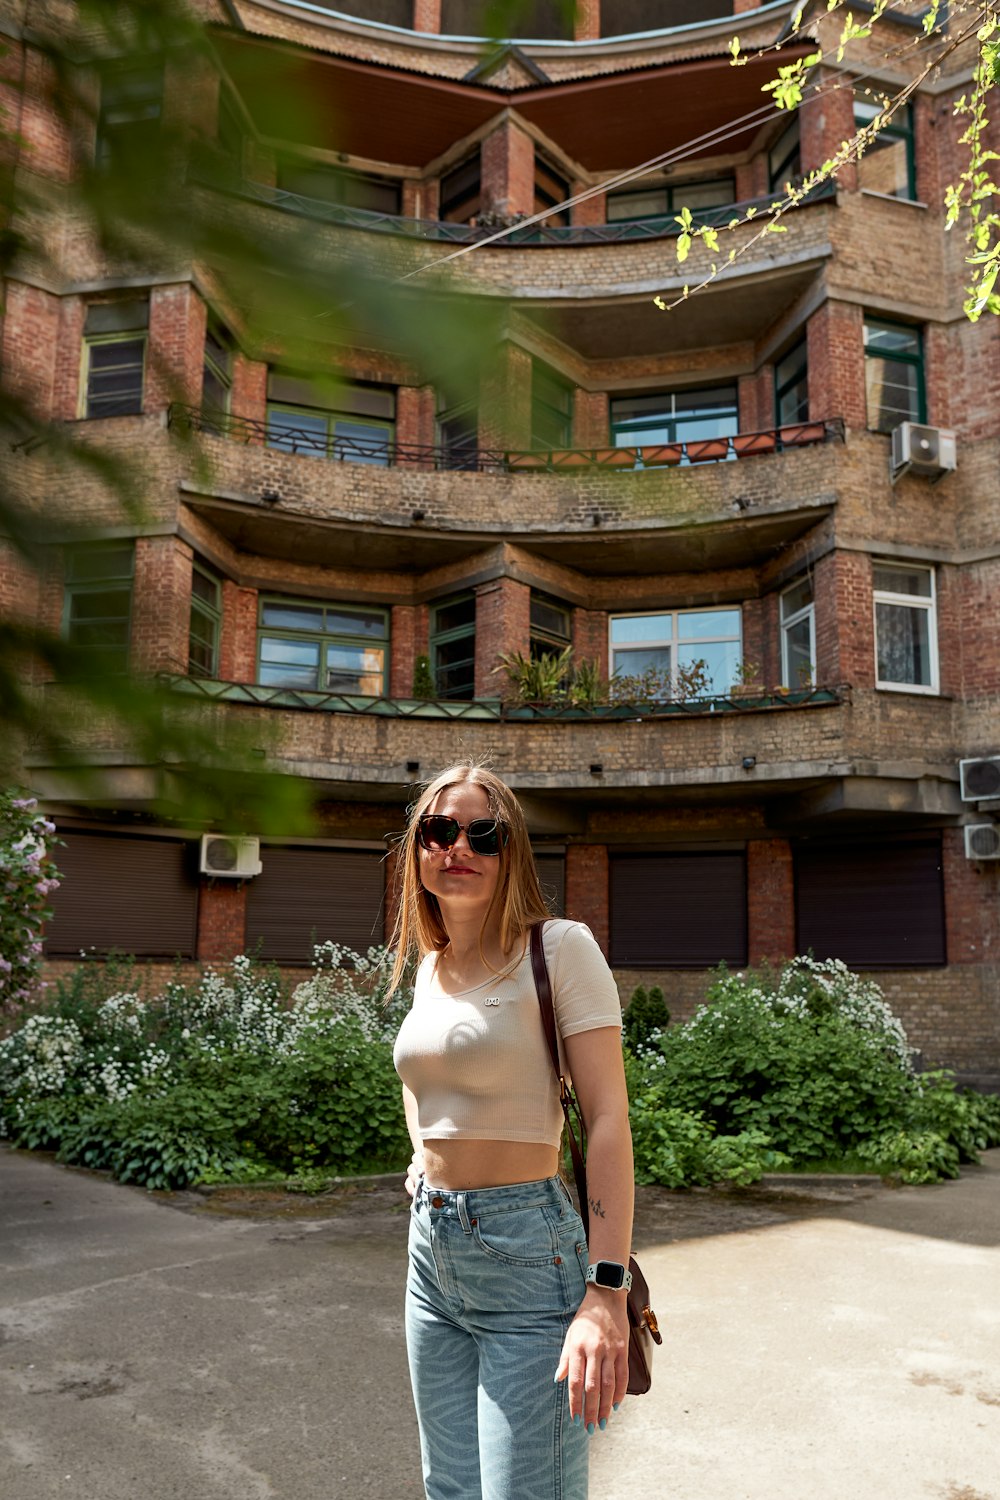 a woman standing on a skateboard in front of a building